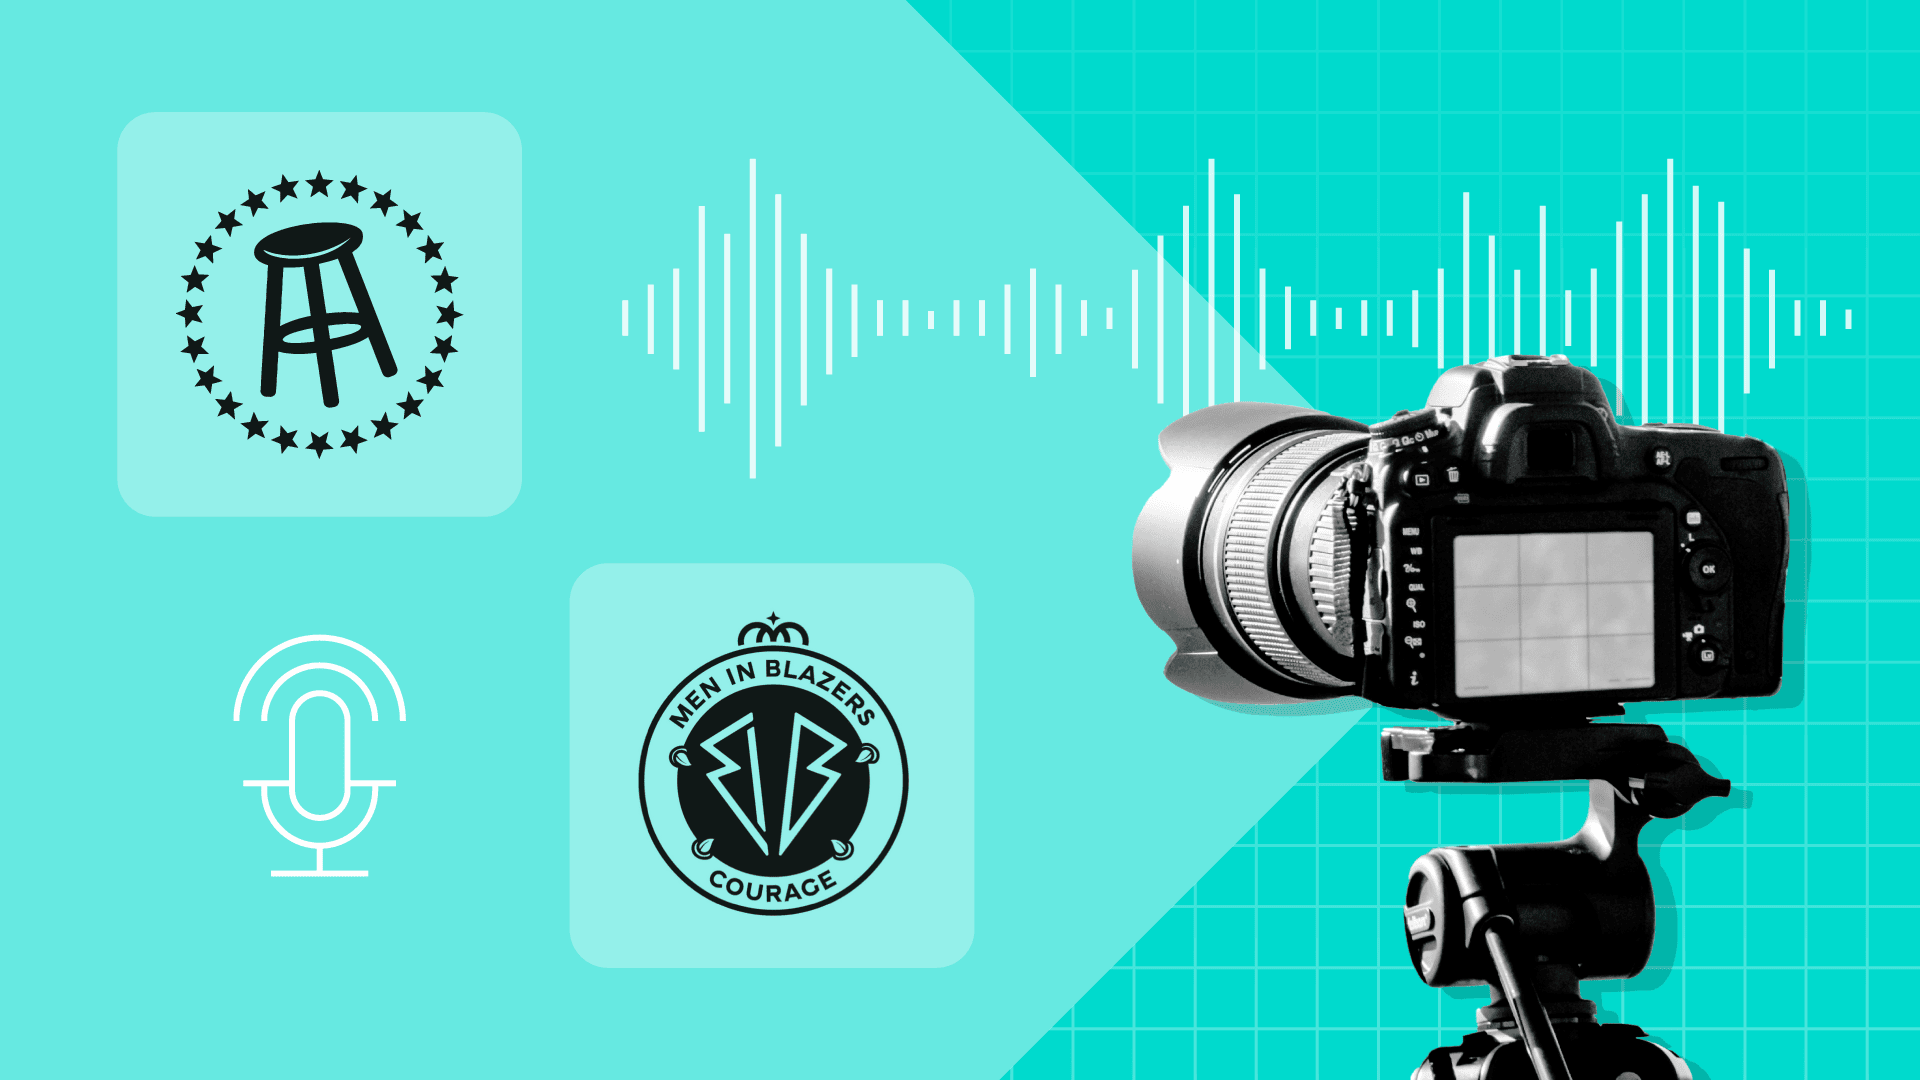 Podcasters First Wanted Your Ears. Now They Want Your Eyes Too